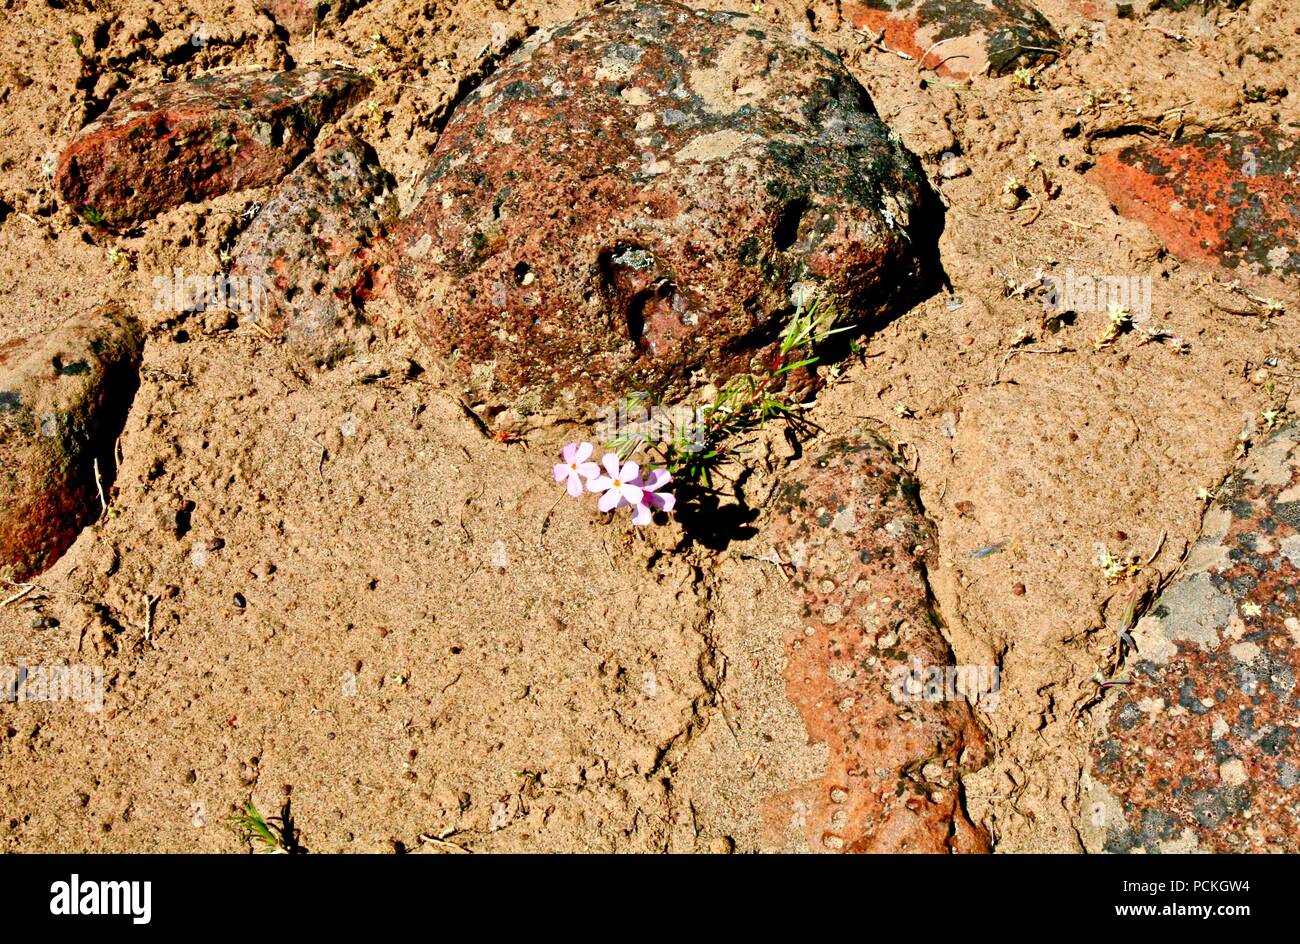 pink wildflowers in desert with rocks Stock Photo